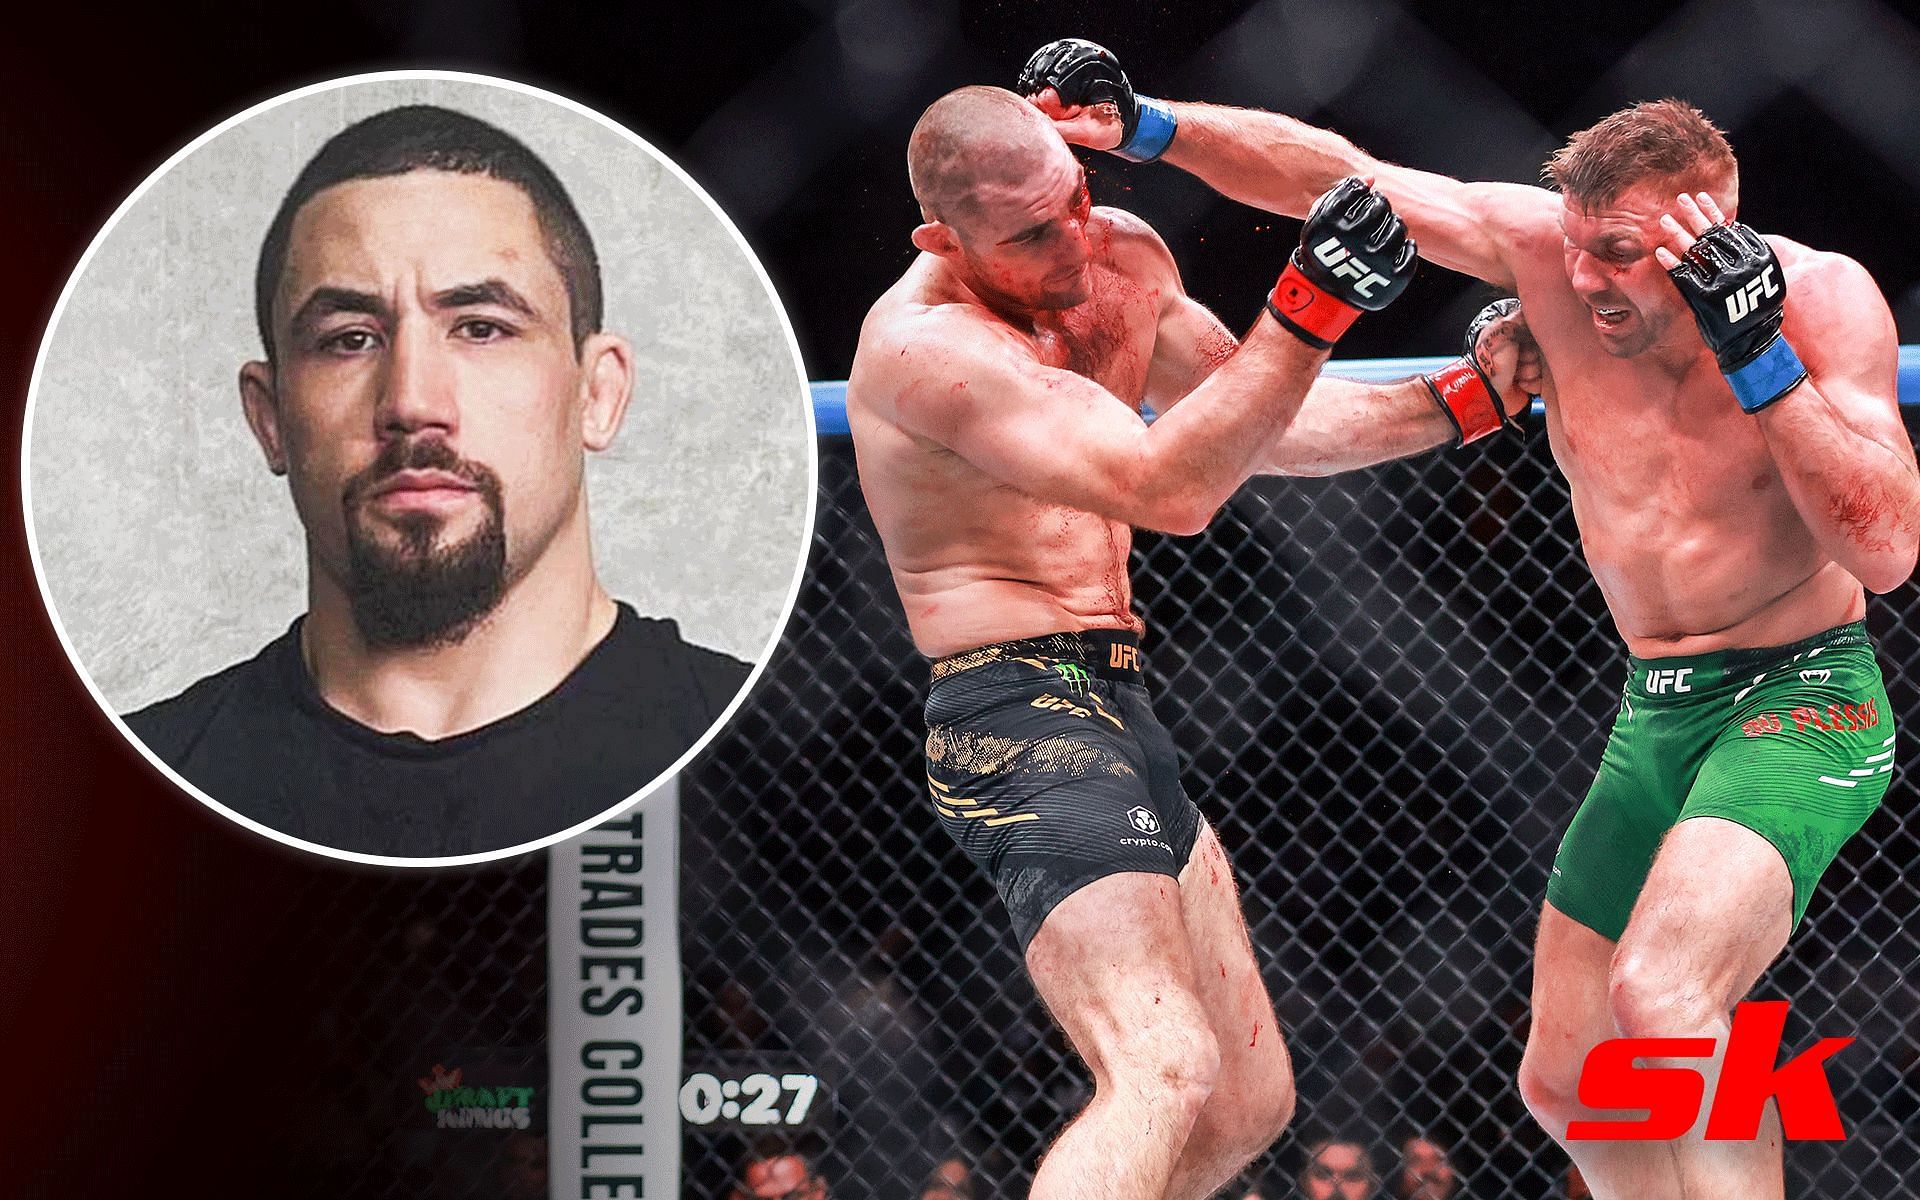 Robert Whittaker shares his opinion on Dricus du Plessis